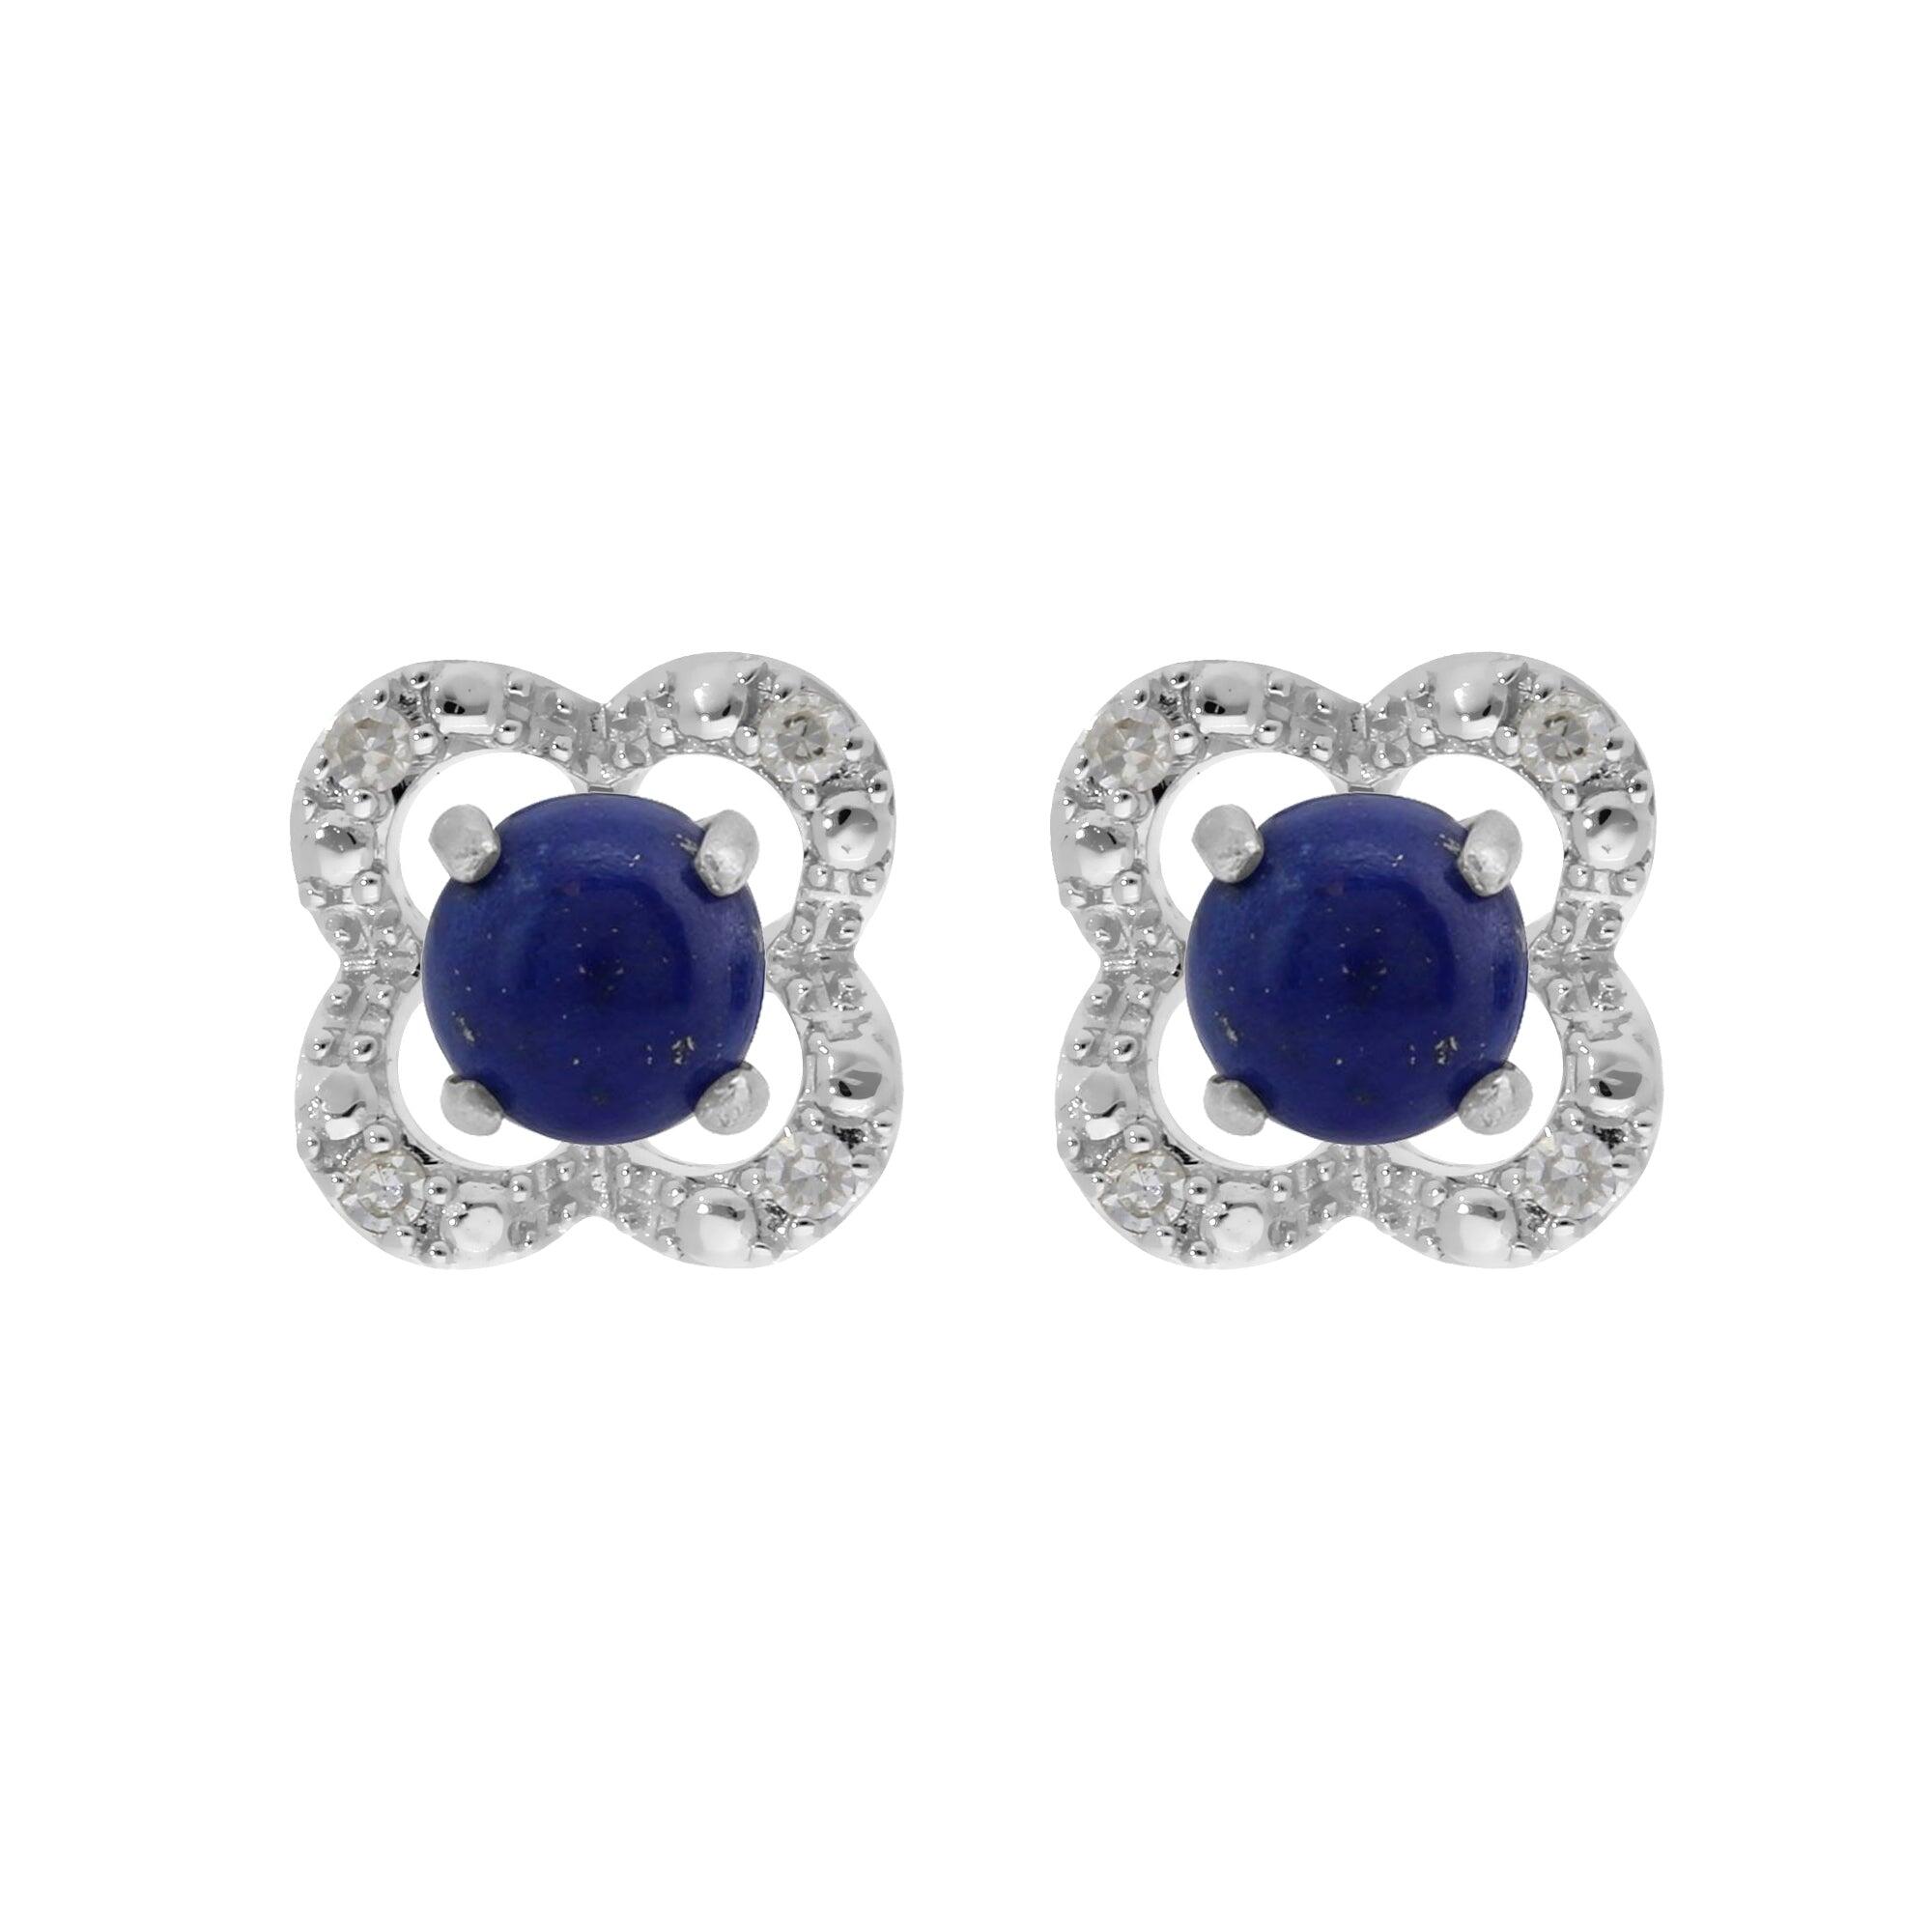 Classic Round Lapis Lazuli Studs with Detachable Diamond Flower Ear Jacket in 9ct White Gold